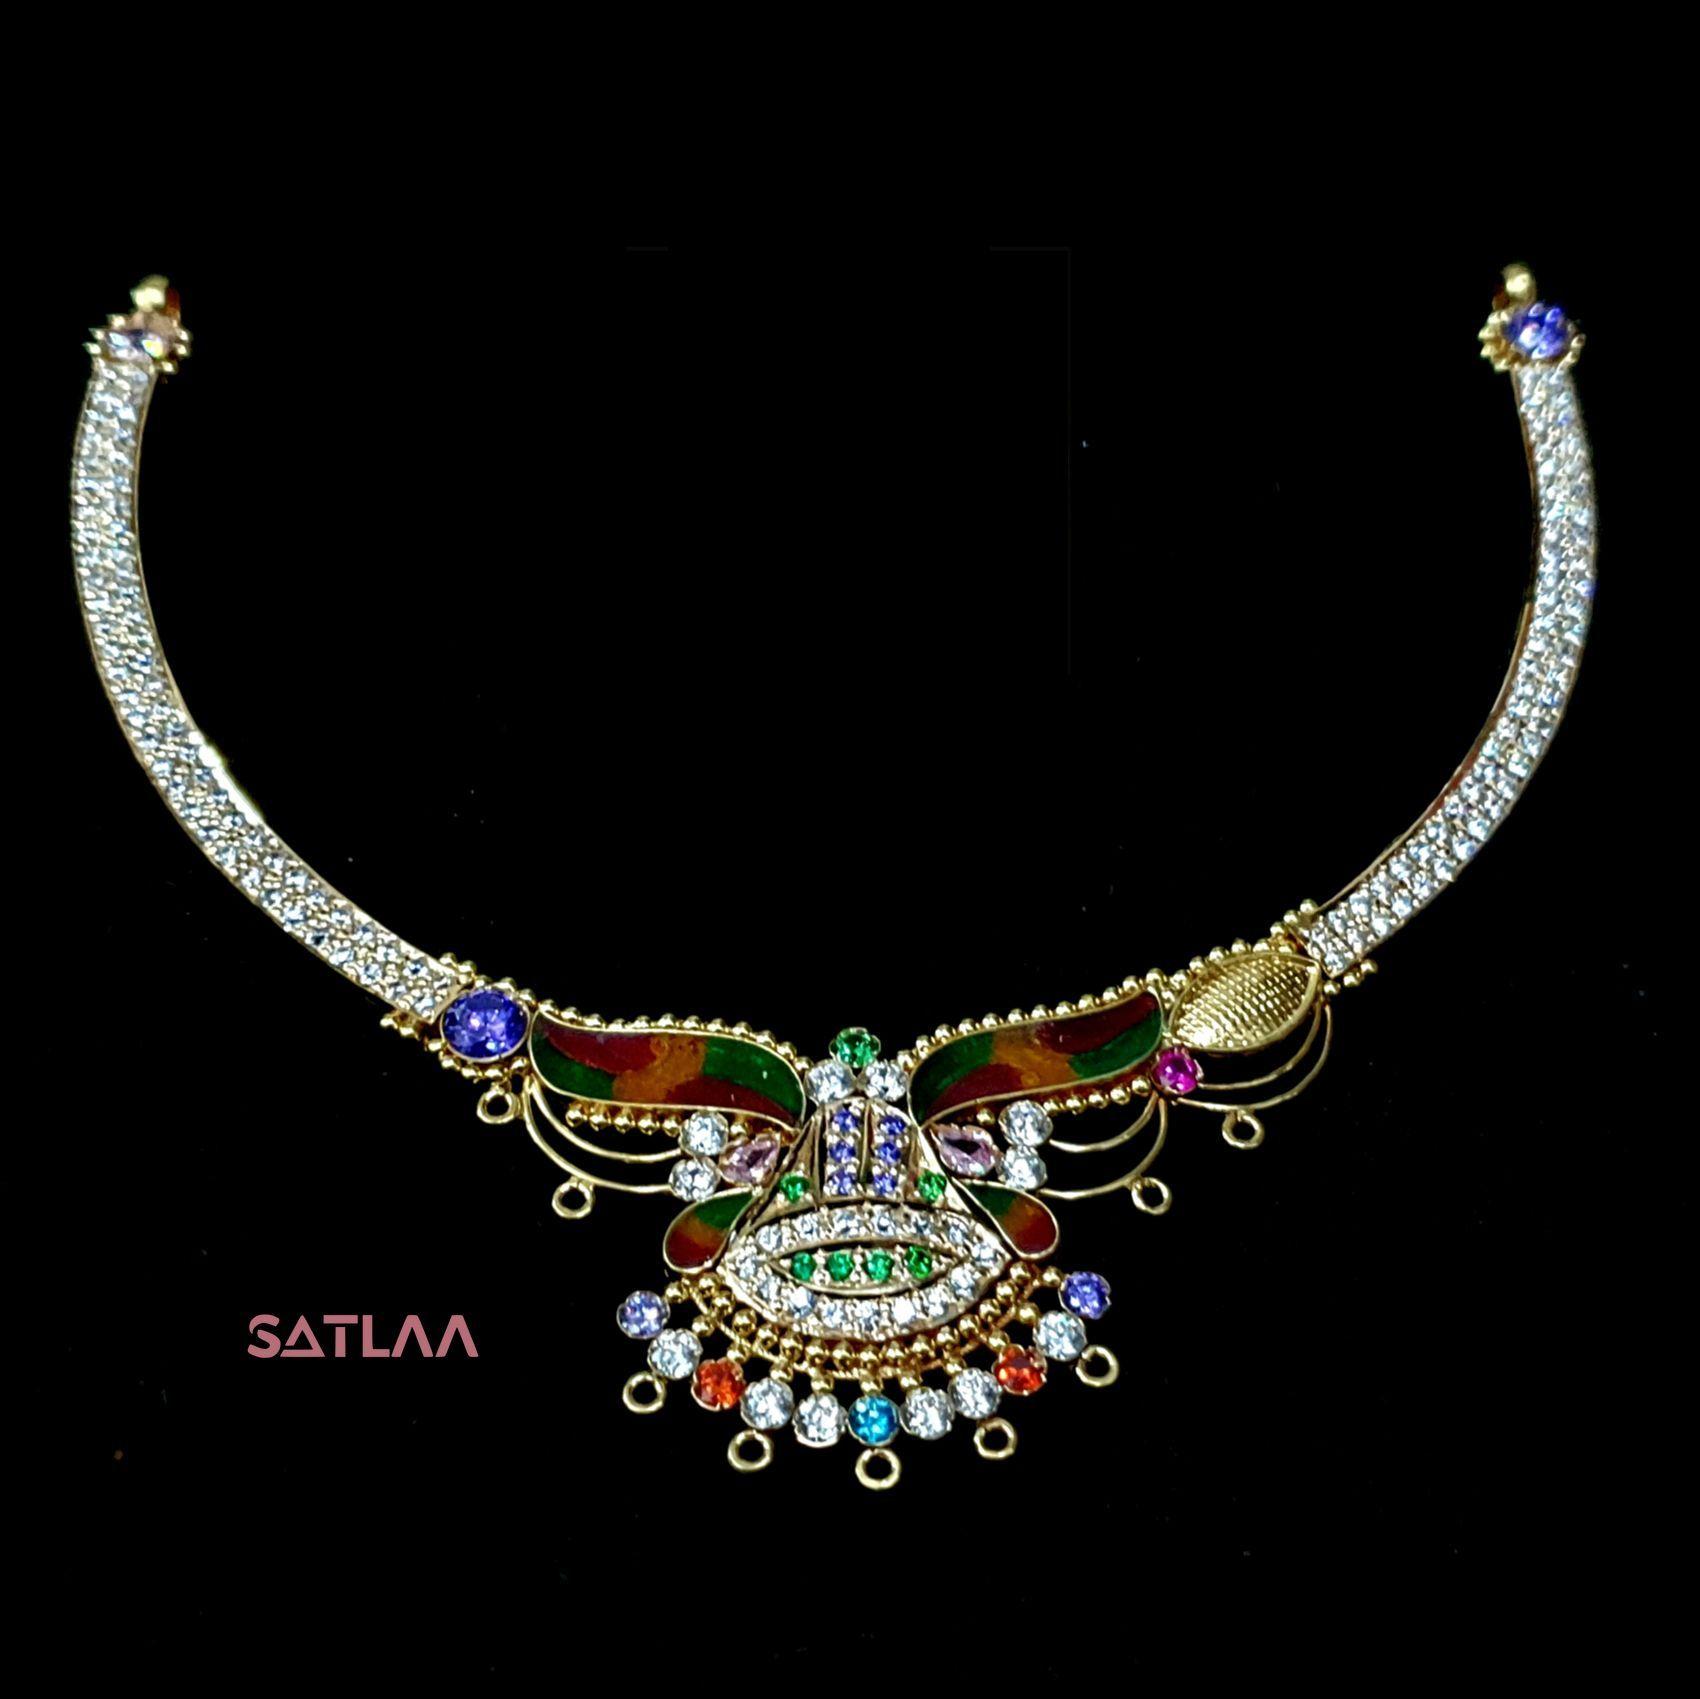 New and Latest Design of Satlaa Desi Indian Rajasthani Gold Necklace 